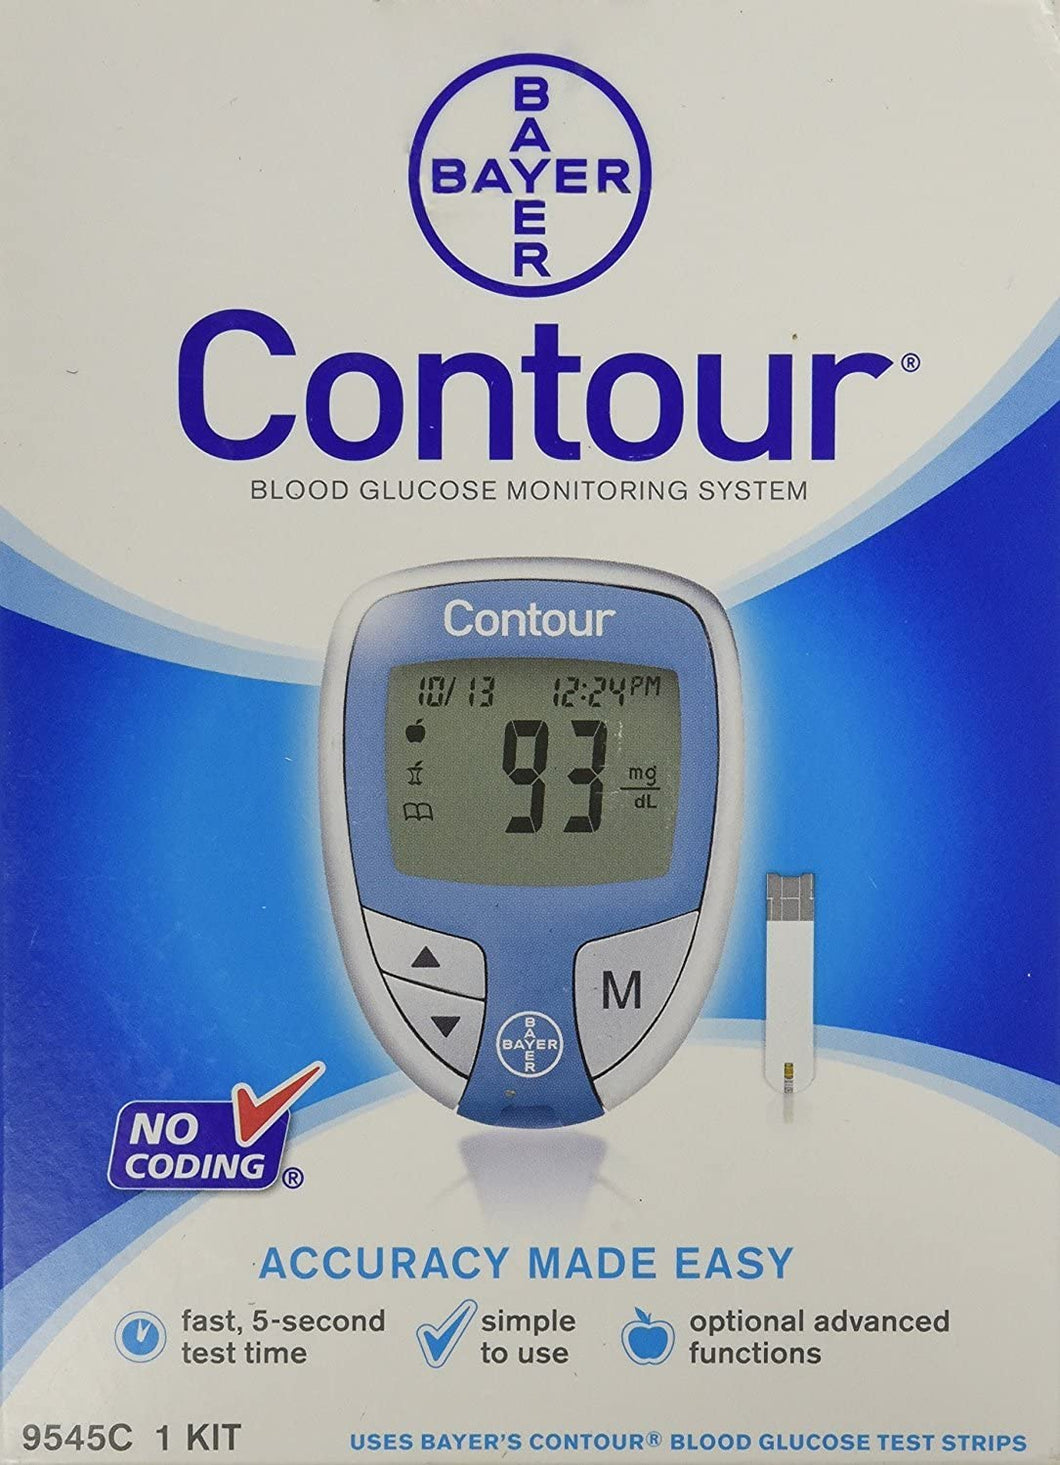 Echt Martin Luther King Junior twee Bayer Contour Blood Glucose Meter system [ New UNIT in Box] – Pans Pro